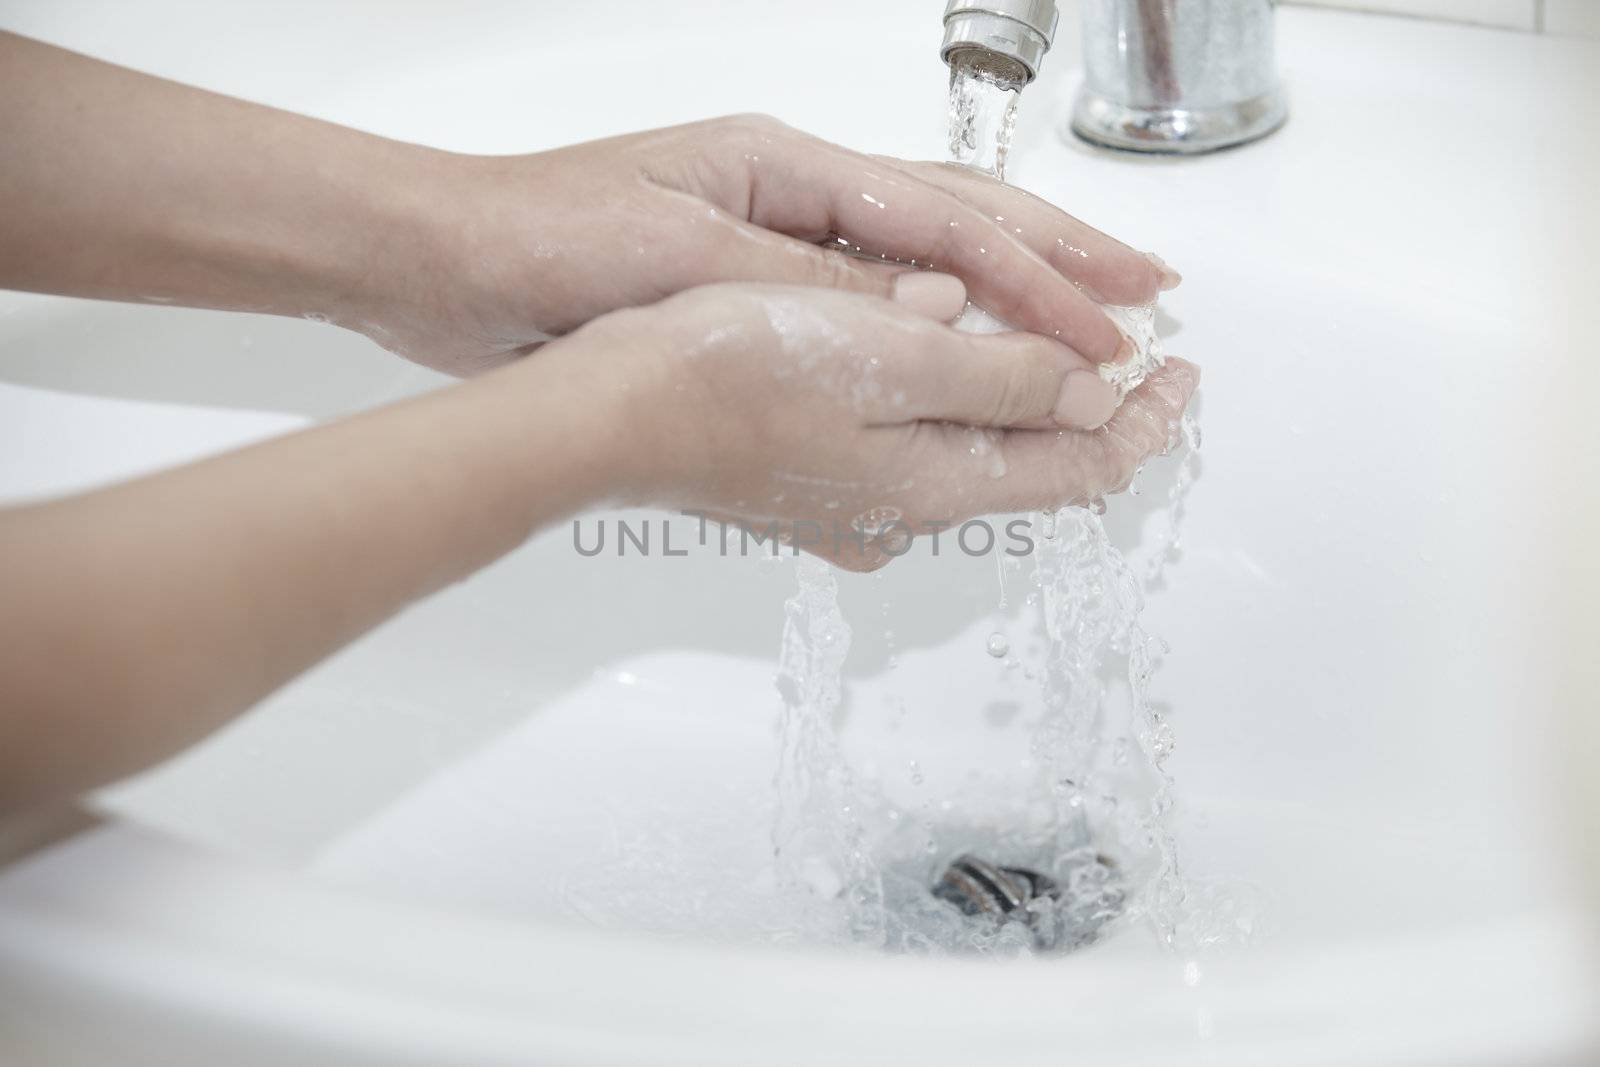 Washing hands by Novic